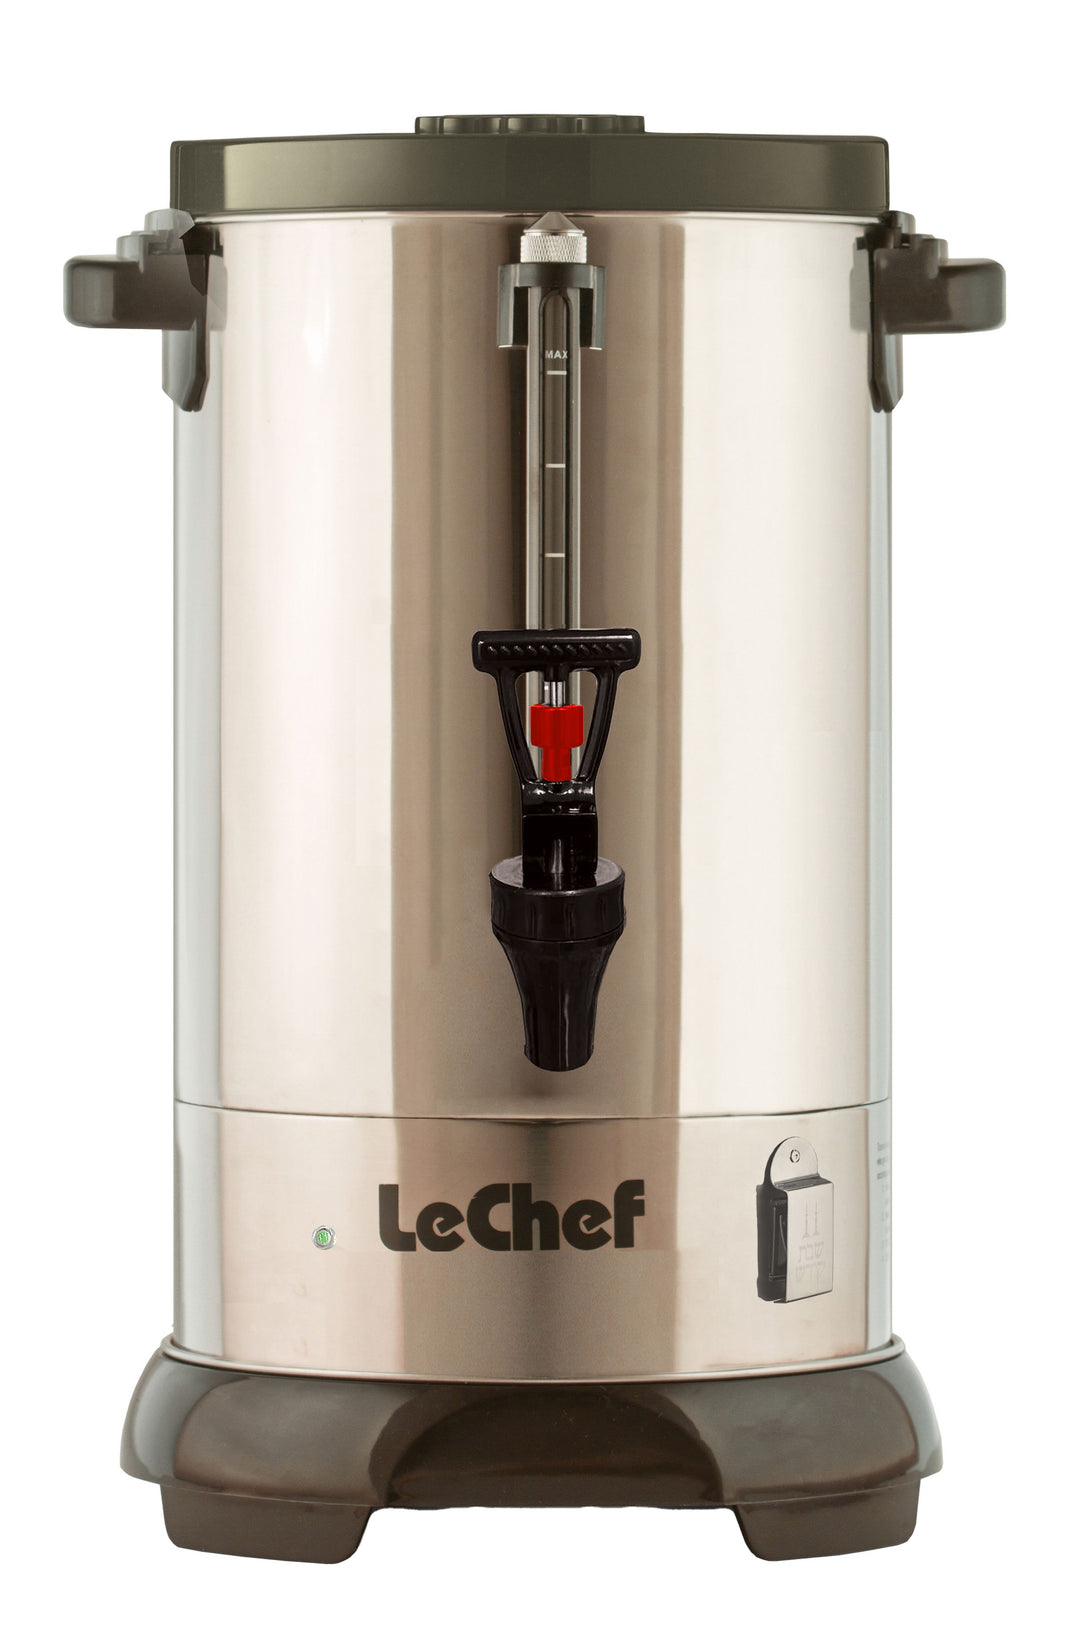 LE'CHEF ELECTRIC HOT WATER URN 40 CUP WITH SAFETY SPOUT MODEL# LURS40